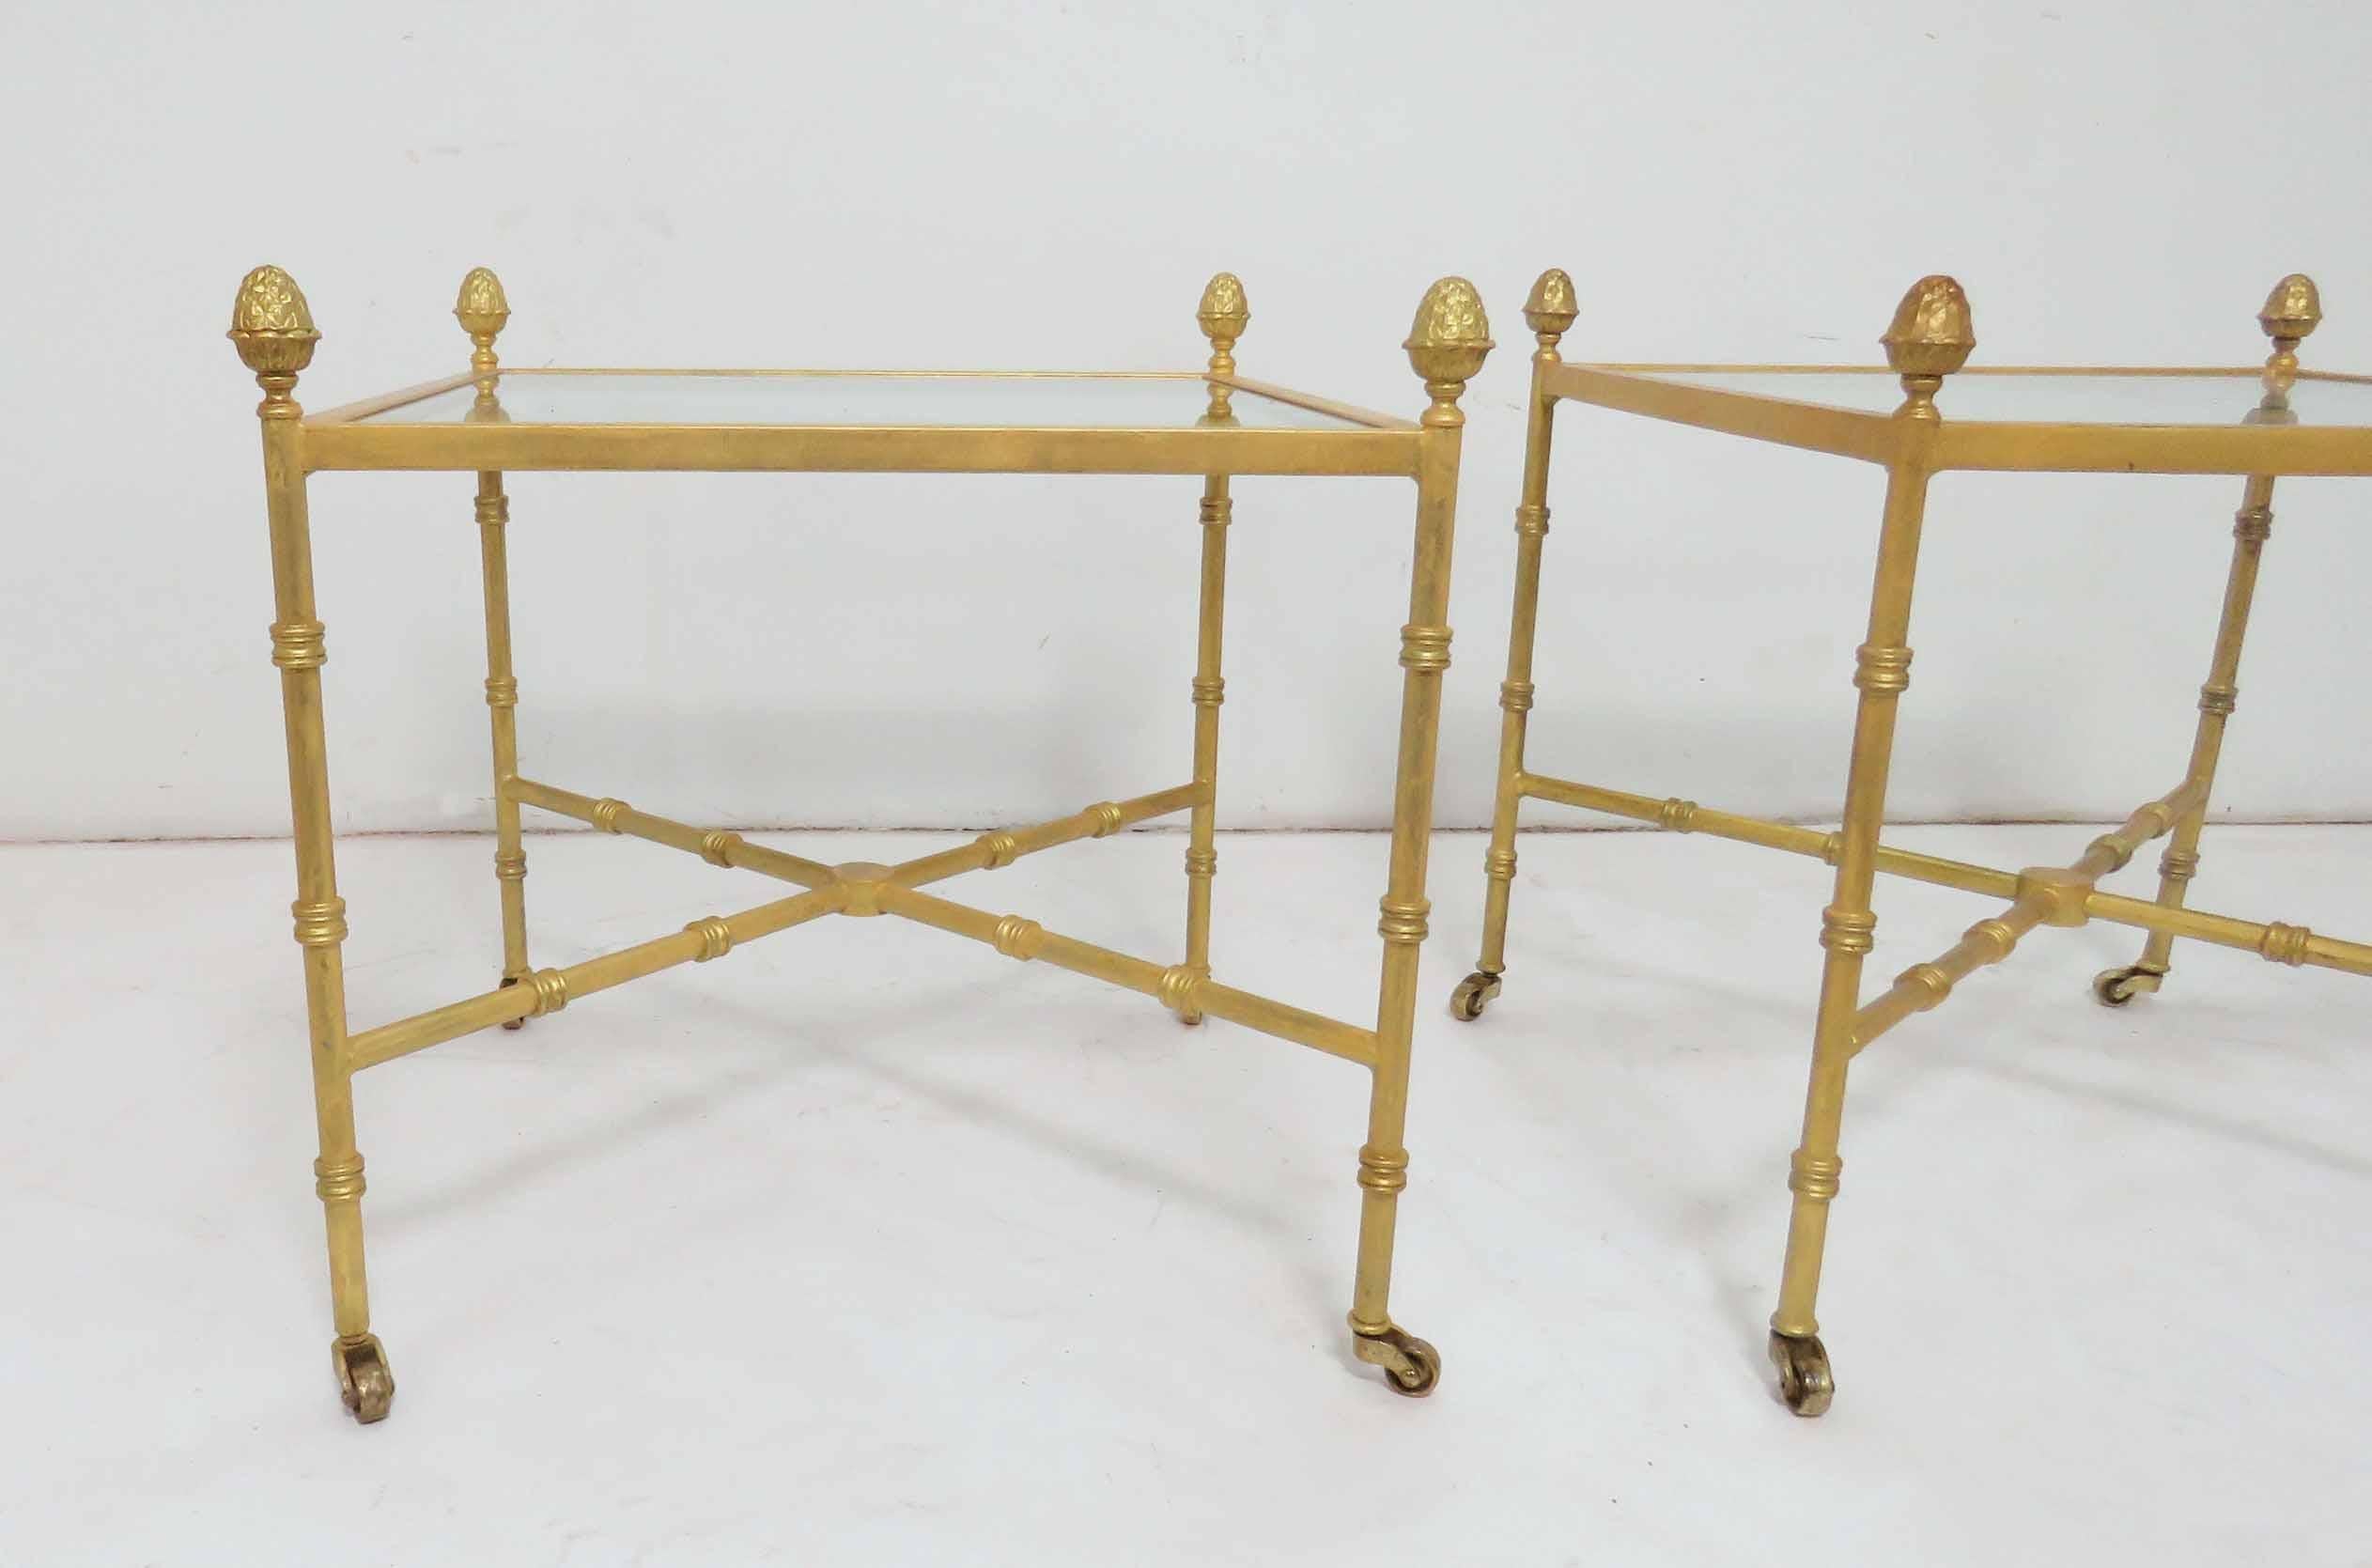 Pair of glass top end tables in gilt metal with acorn finial accents, X-form stretchers, and delicate solid brass casters.

Measures: 20.75